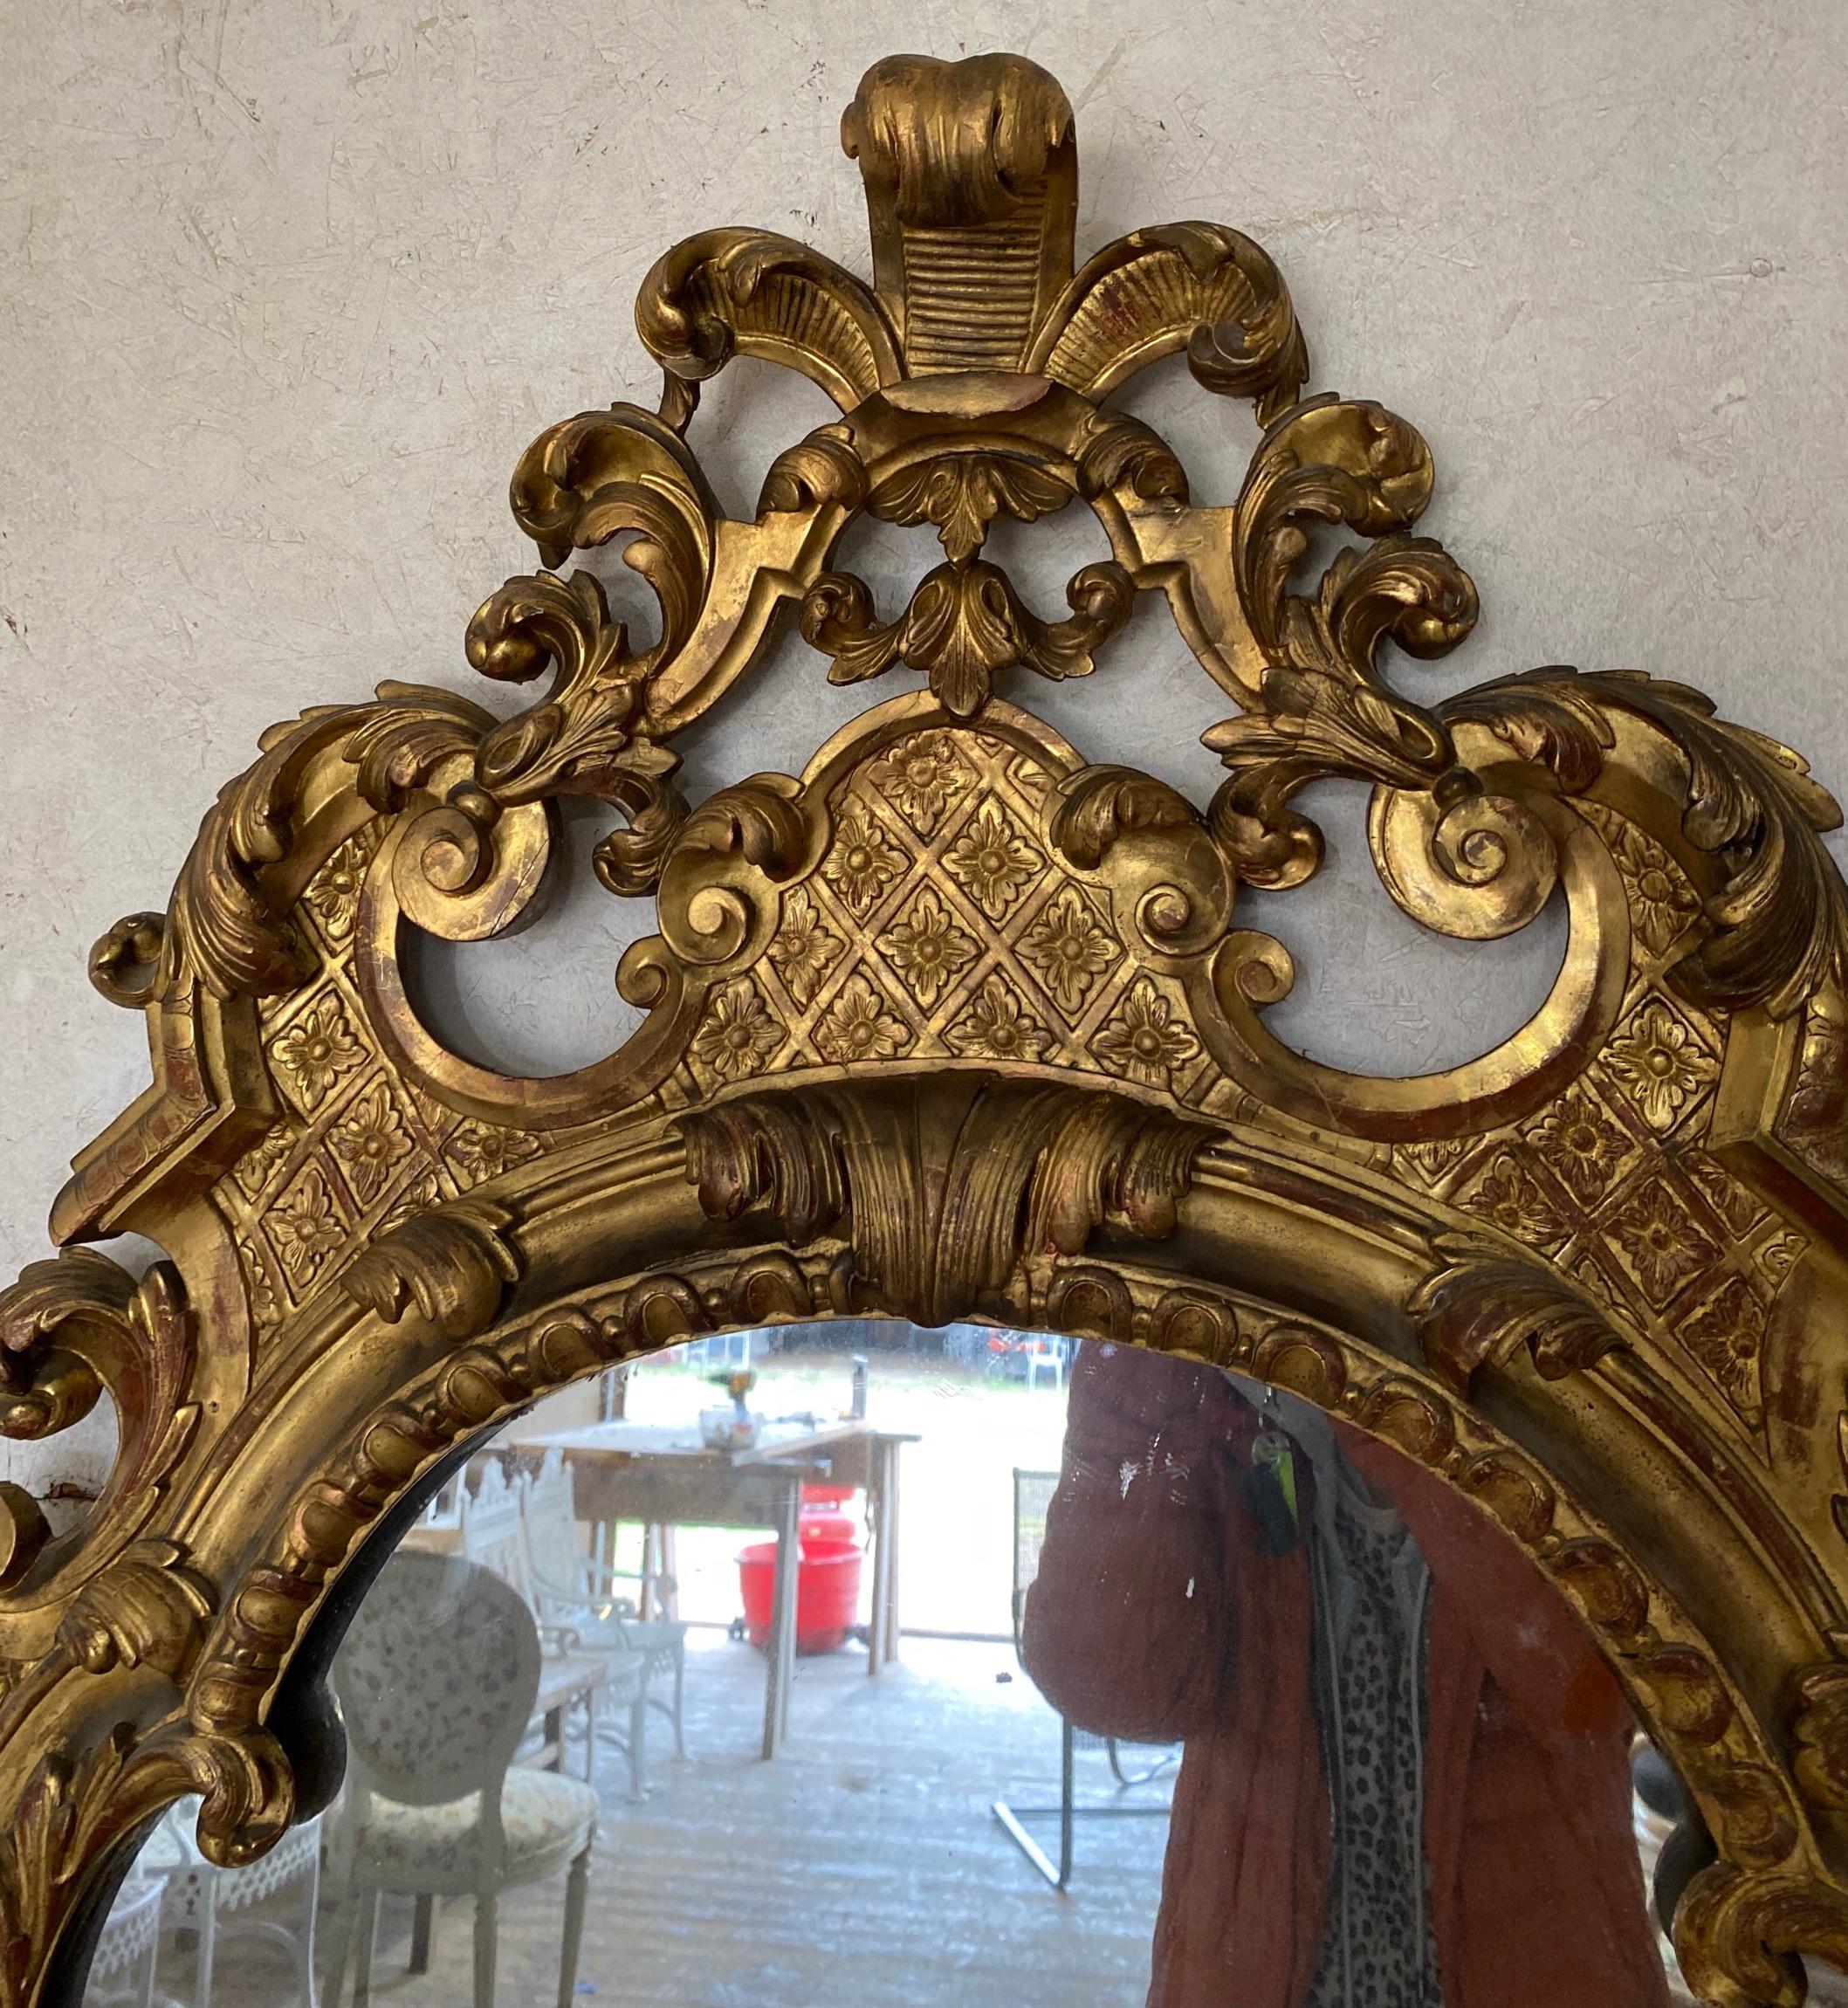 A rare large early 18th century Continental gilt-wood pier mirror with gilt frame the crest with a flamboyant decoration around a frame. Antique split mirror plates shows aged distress with some dark spots in areas giving it character and more